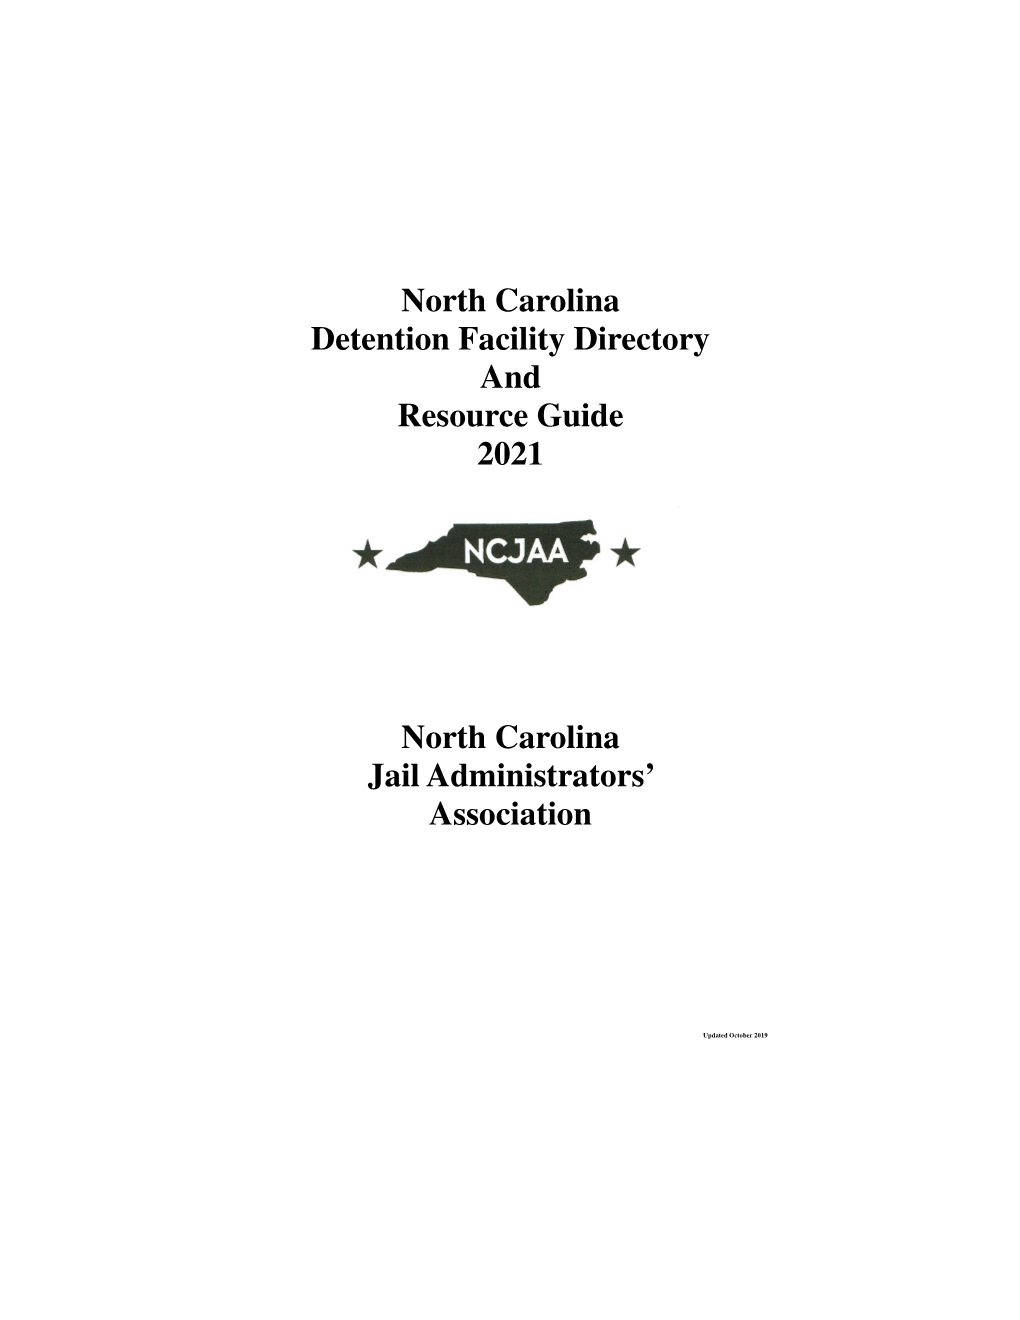 NCJAA Detention Facility Resource Directory